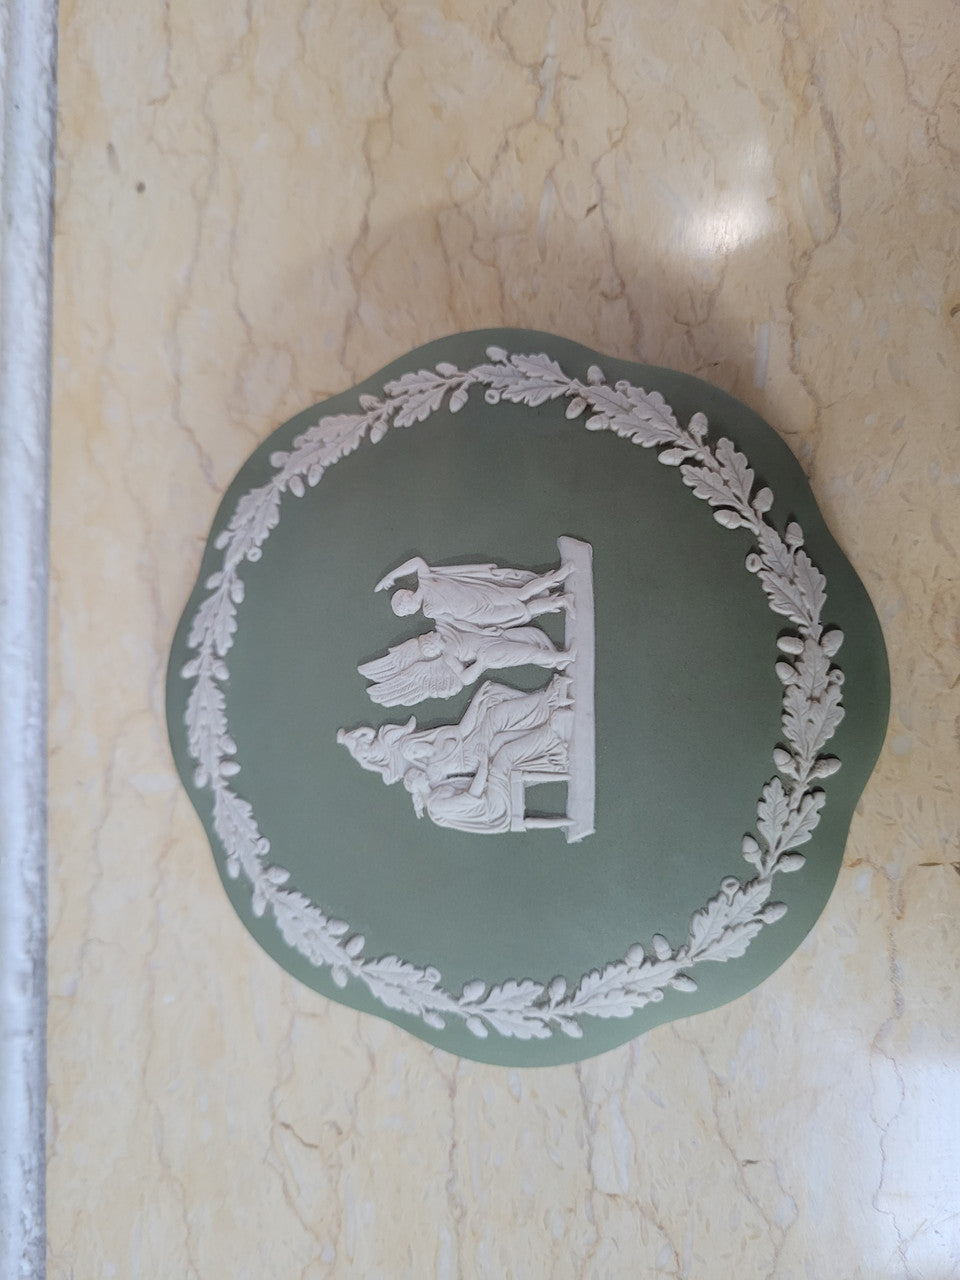 For Sale At Moonee Ponds Antiques Vintage classical design green jasper “Wedgwood” large round lidded trinket box. In good condition please view photos as they help form part of the description.